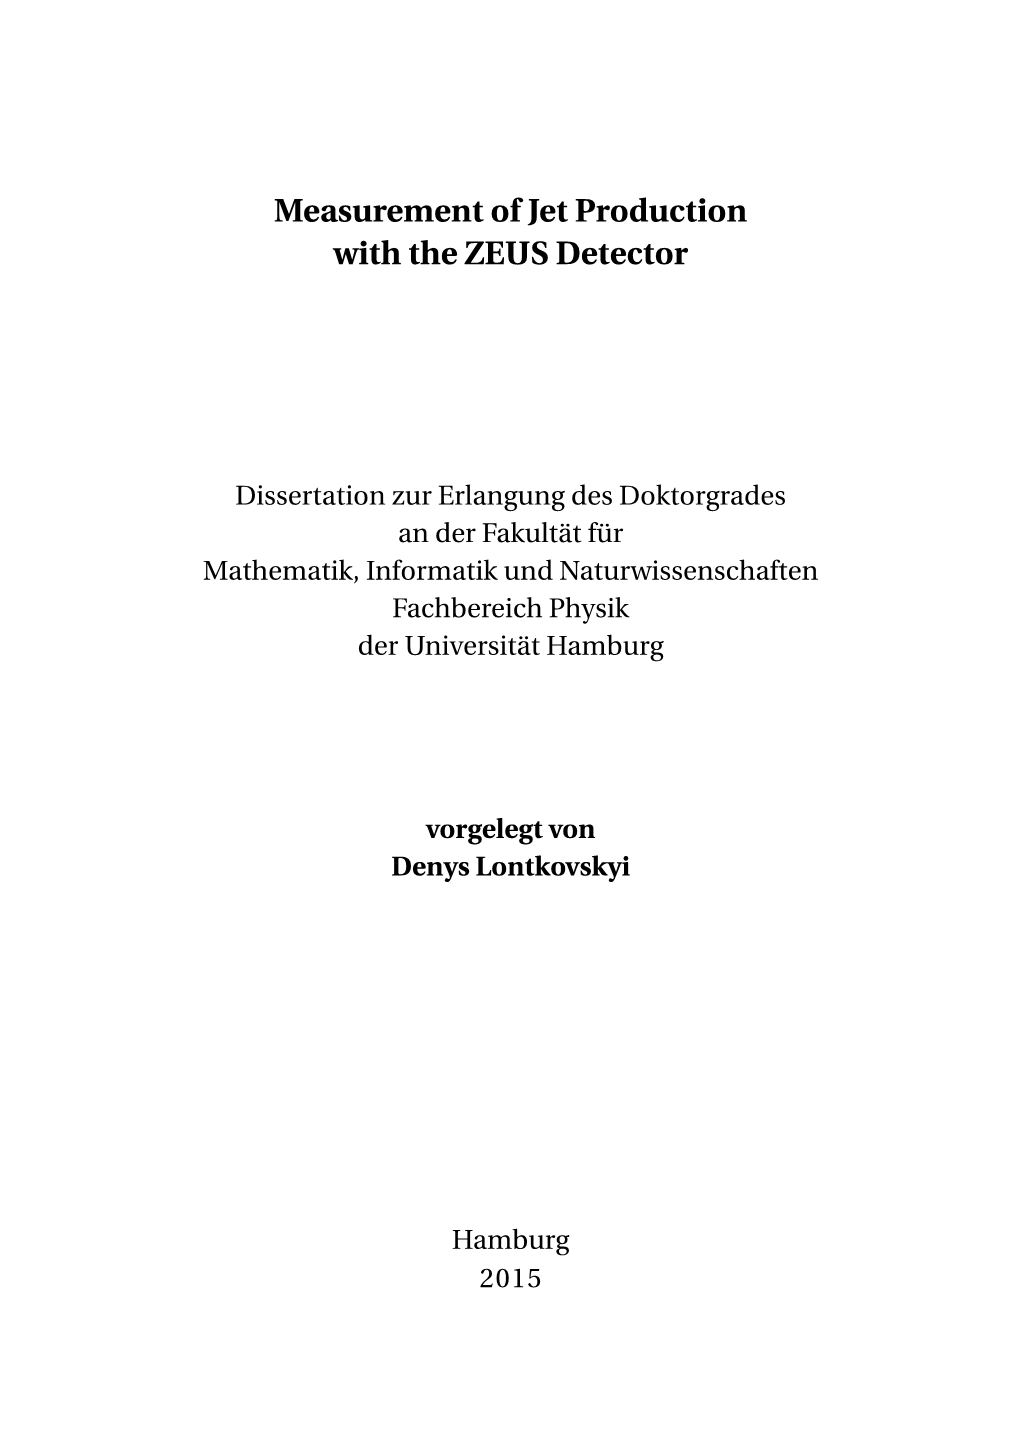 Measurement of Jet Production with the ZEUS Detector